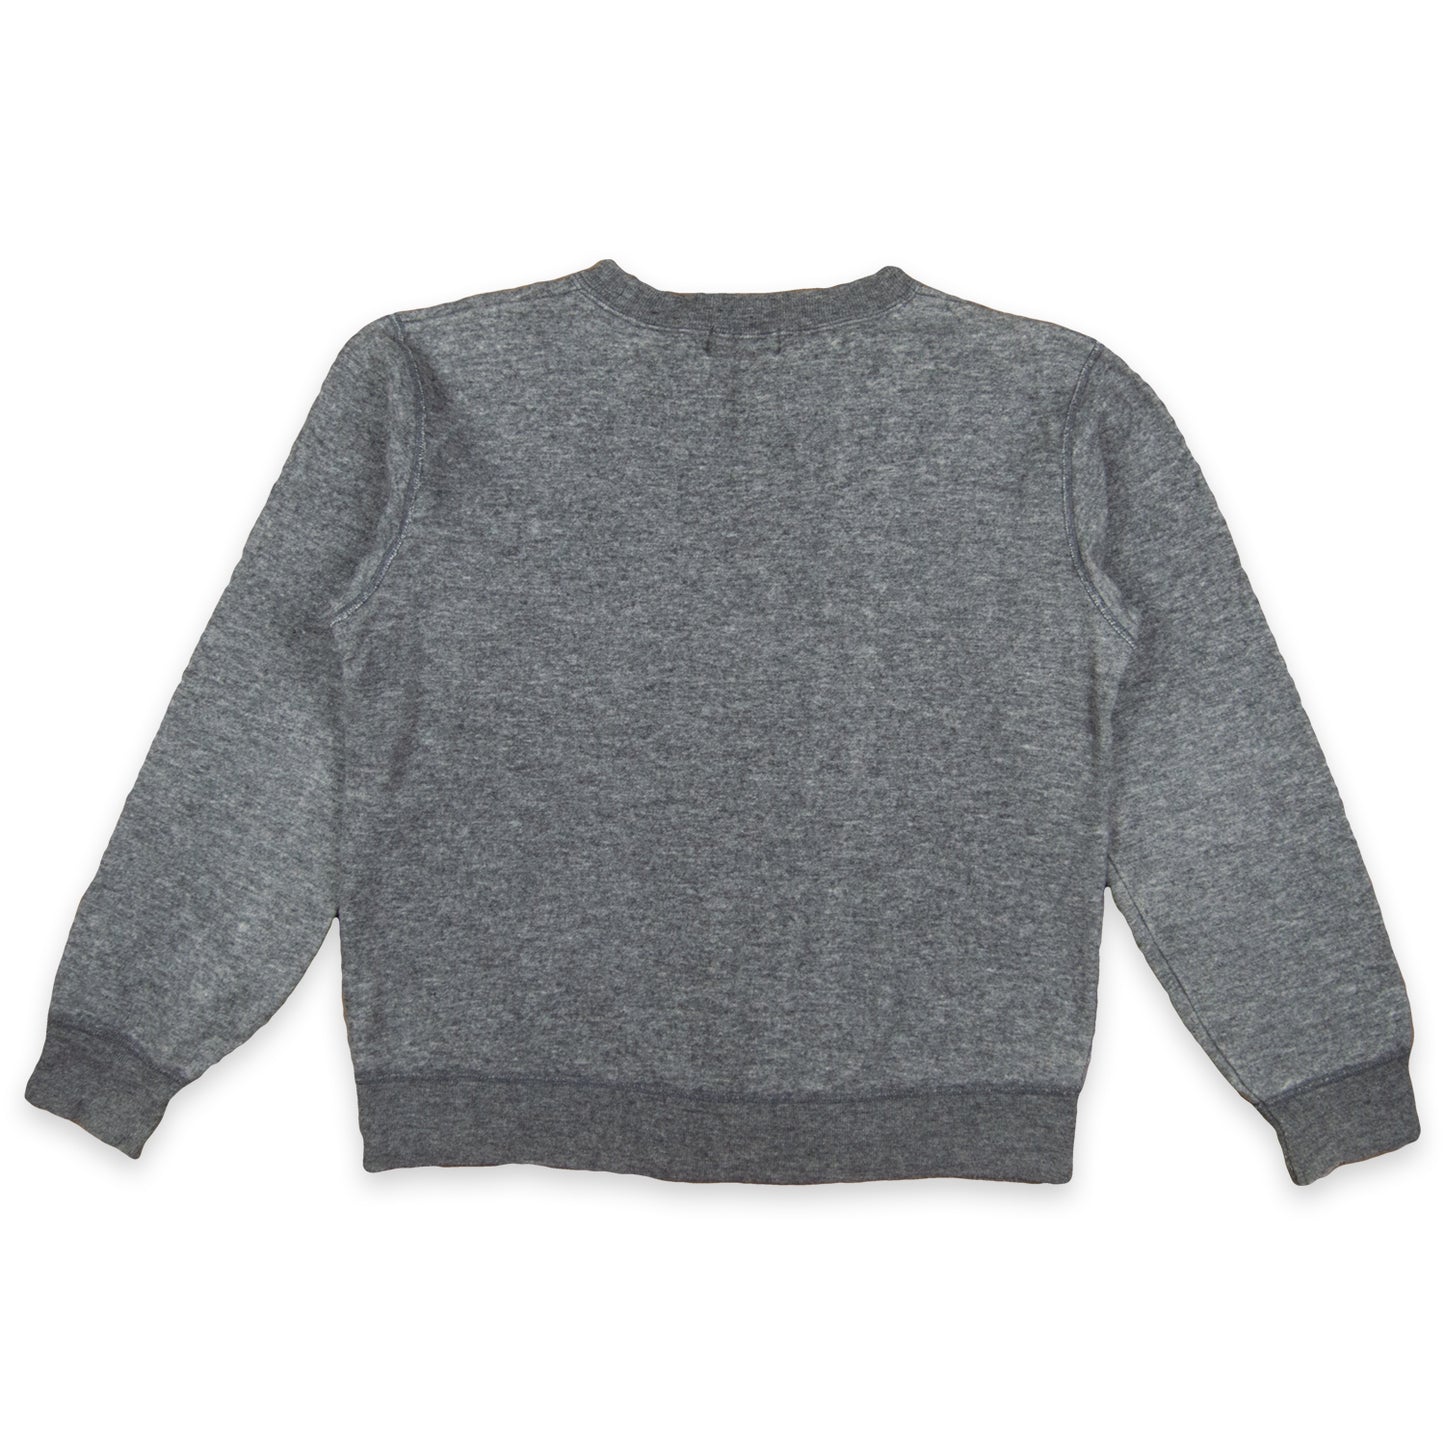 Hysteric Glamour Super Relax Wool Blend Crewneck